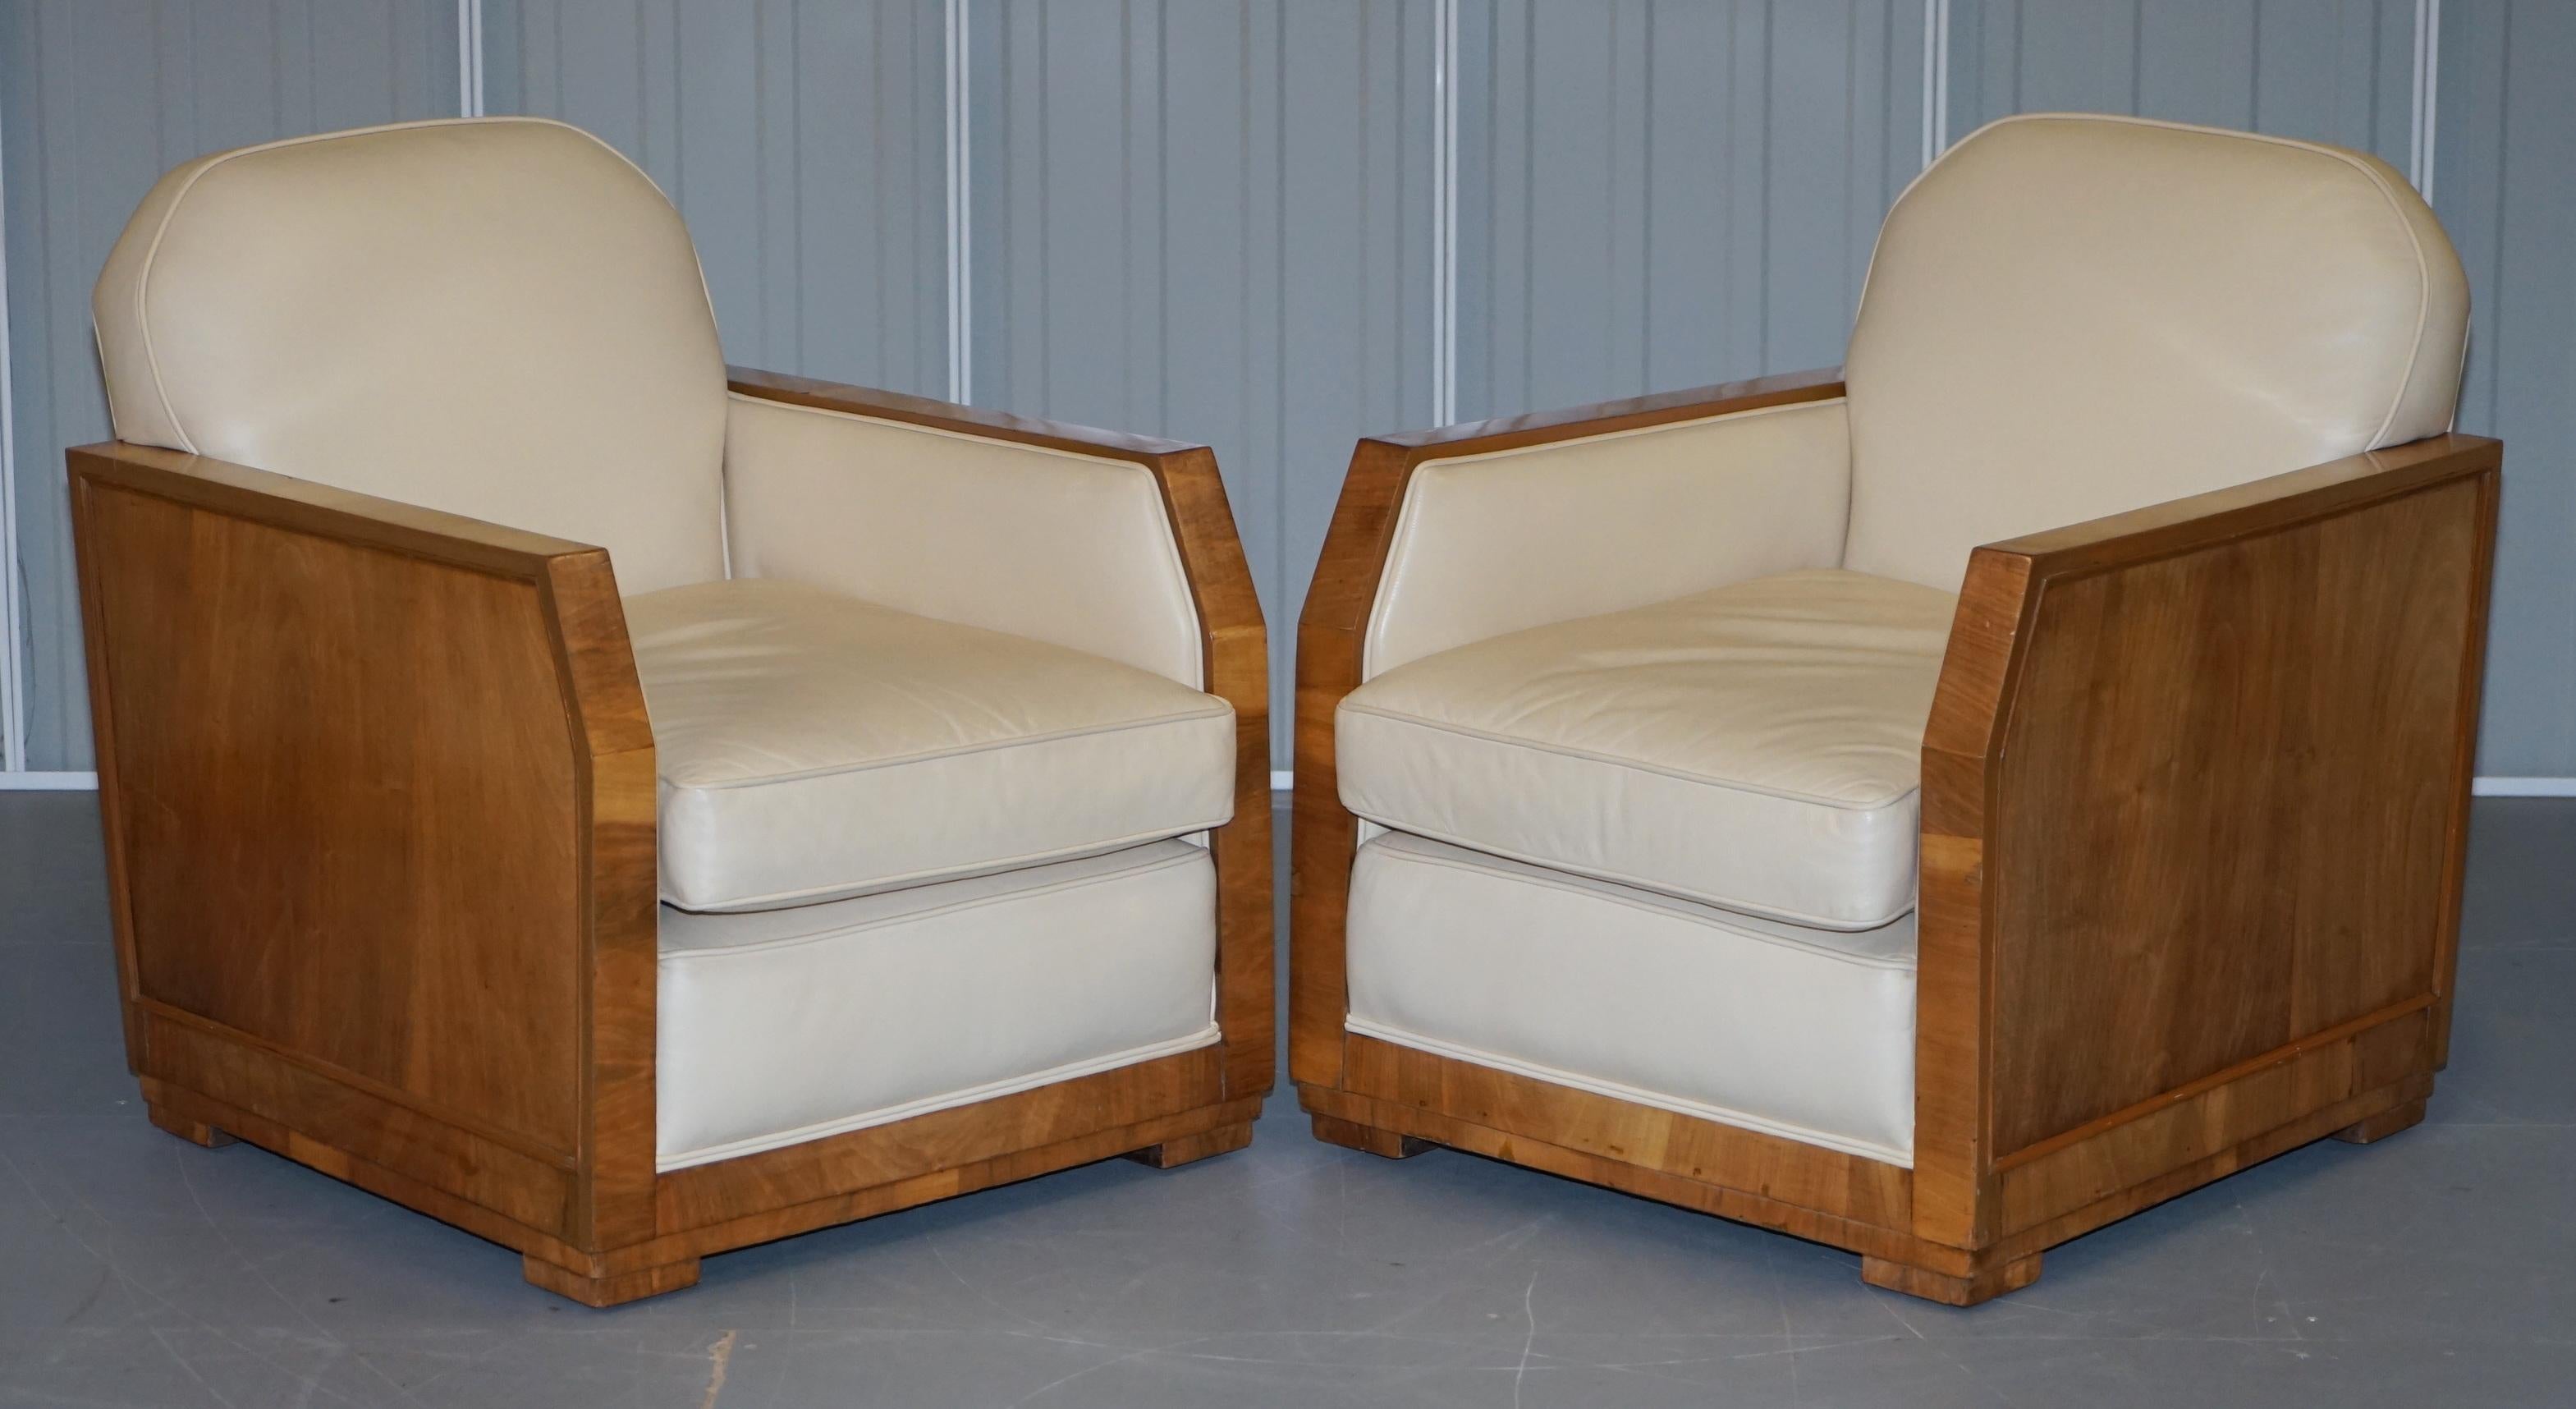 We are delighted to offer for sale this stunning and very rare Harry & Lou Epstine Art Deco three piece suite with Walnut frames and cream leather upholstery

A very stylish and decorative suite. The flamed walnut has a sublime color and is very